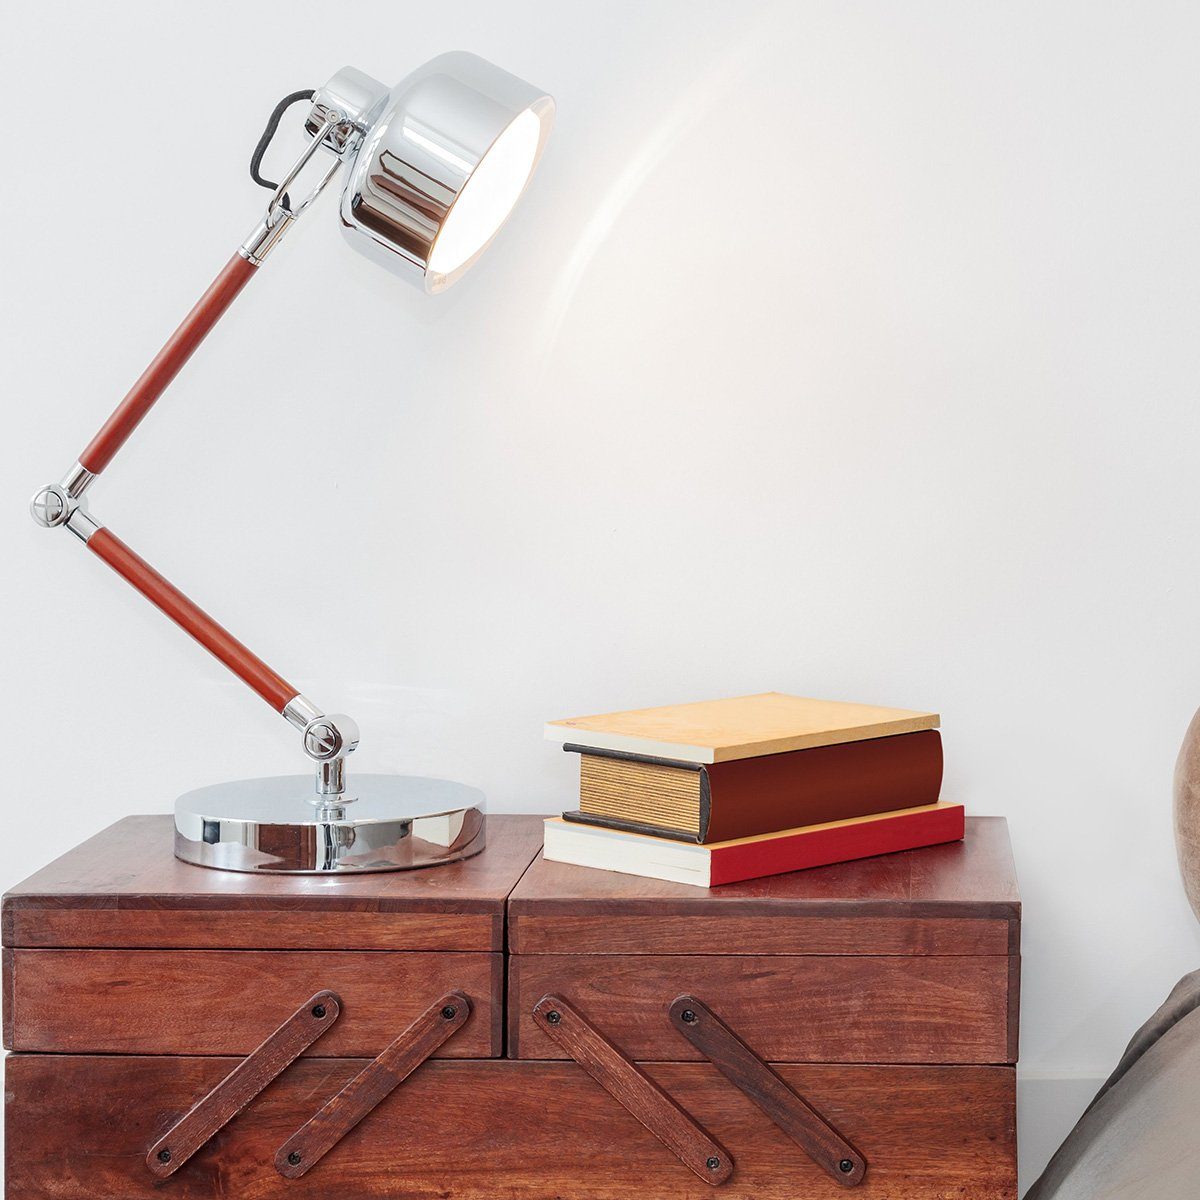 Light and books on a nightstand